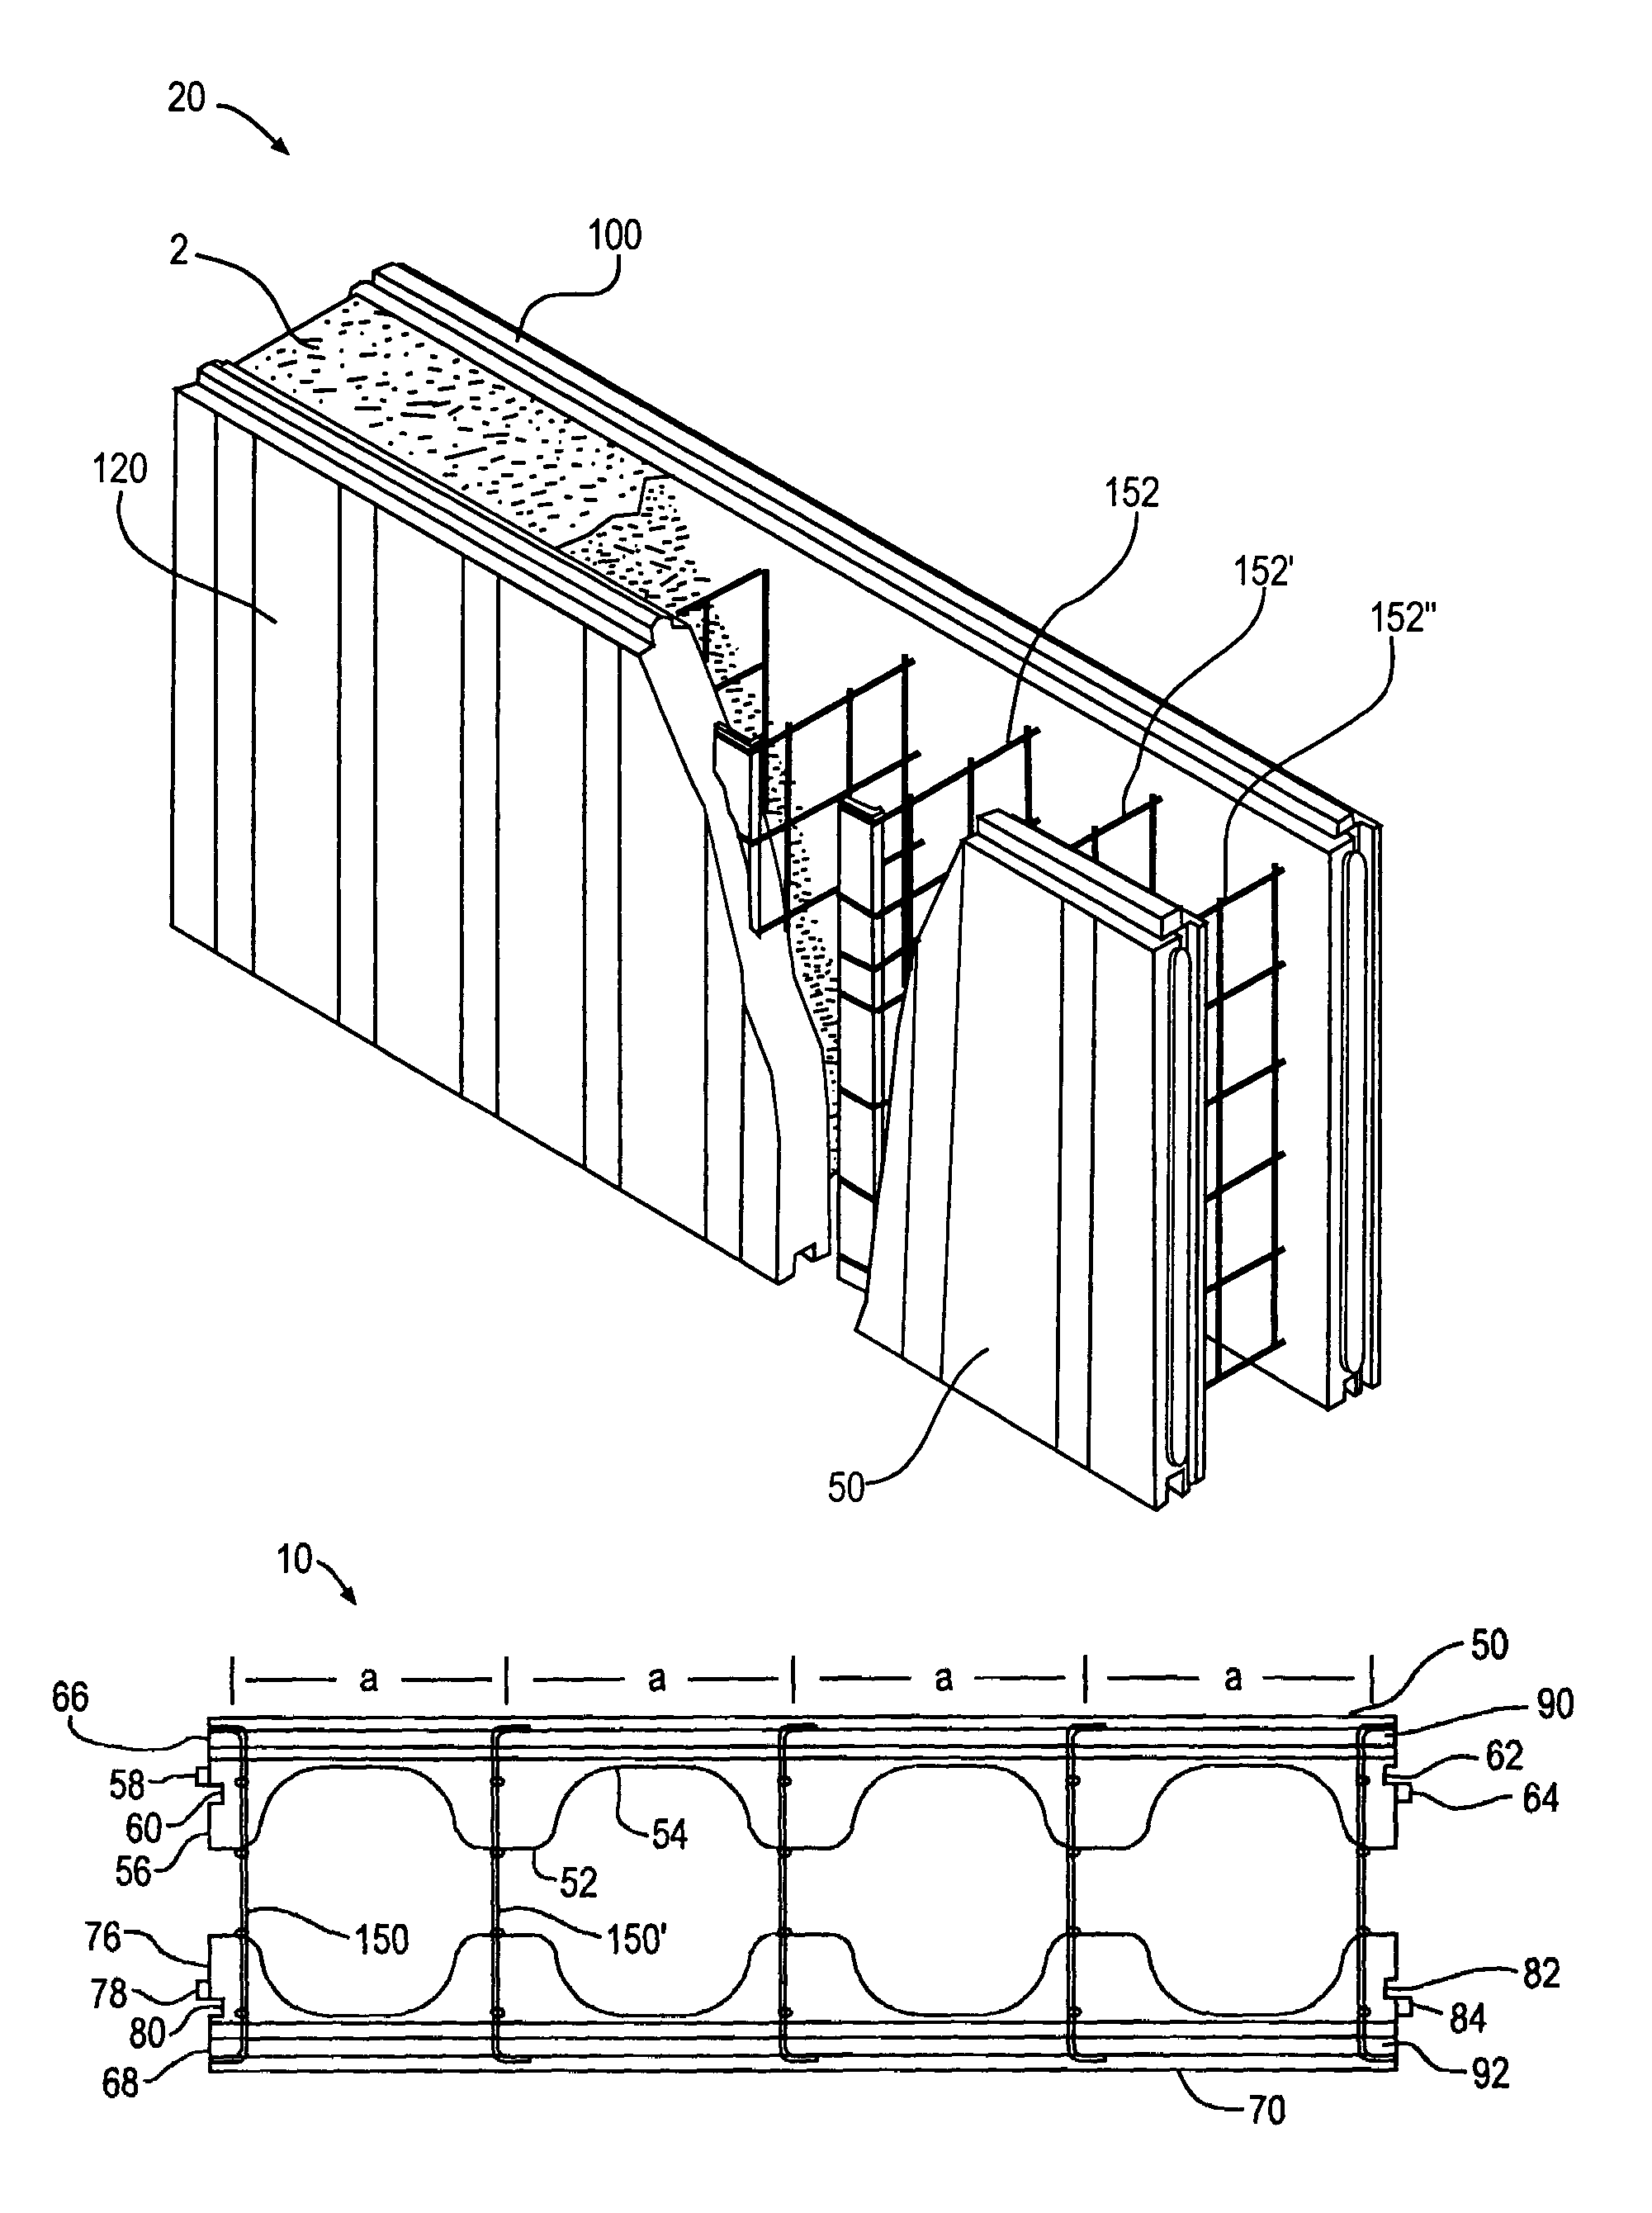 Isulated concrete form having welded wire form tie